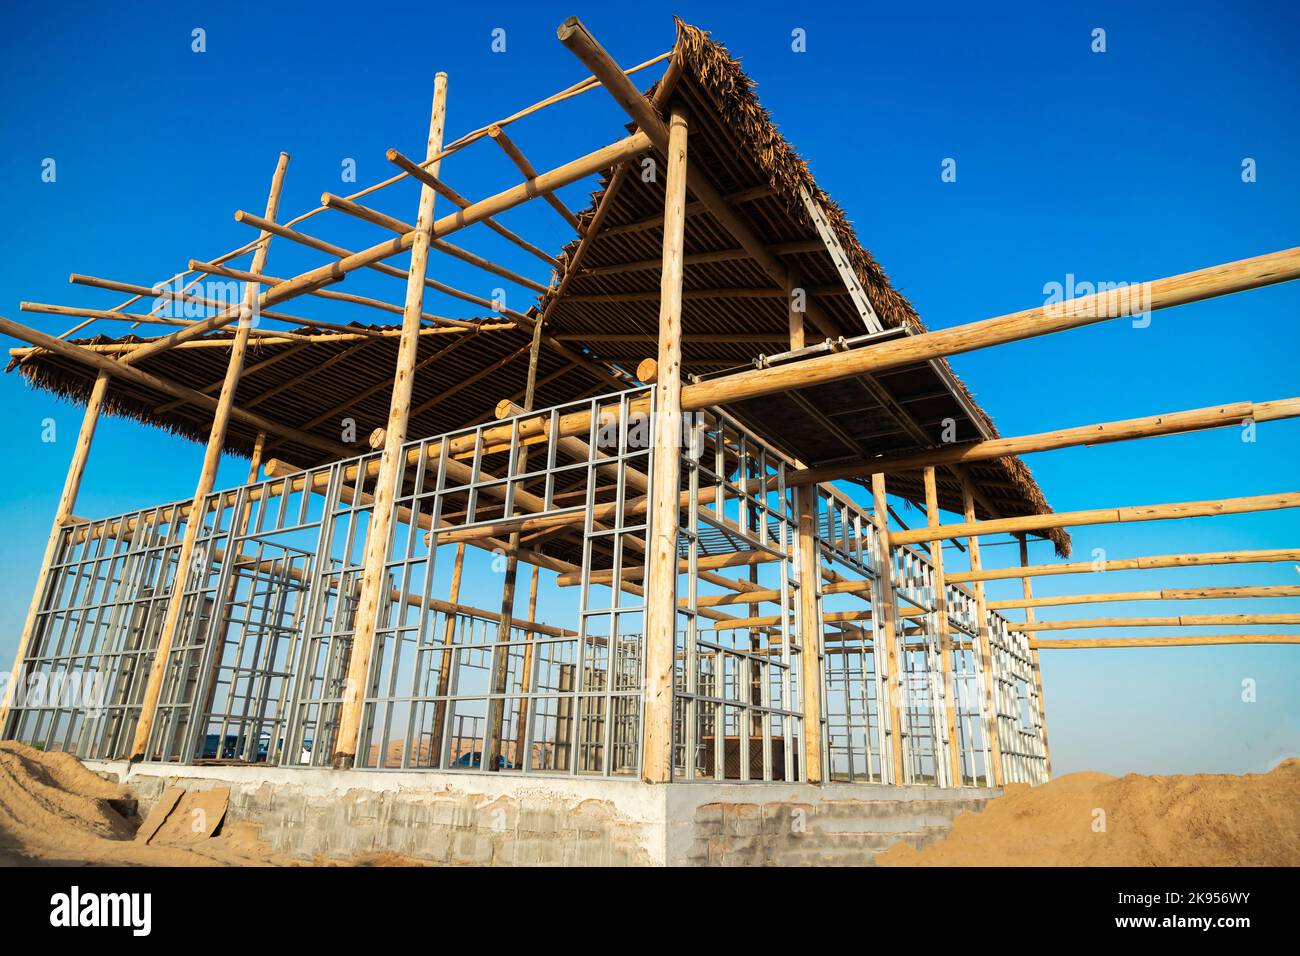 A Steel structured frame work of a building under construction supported by wooden beams Stock Photo